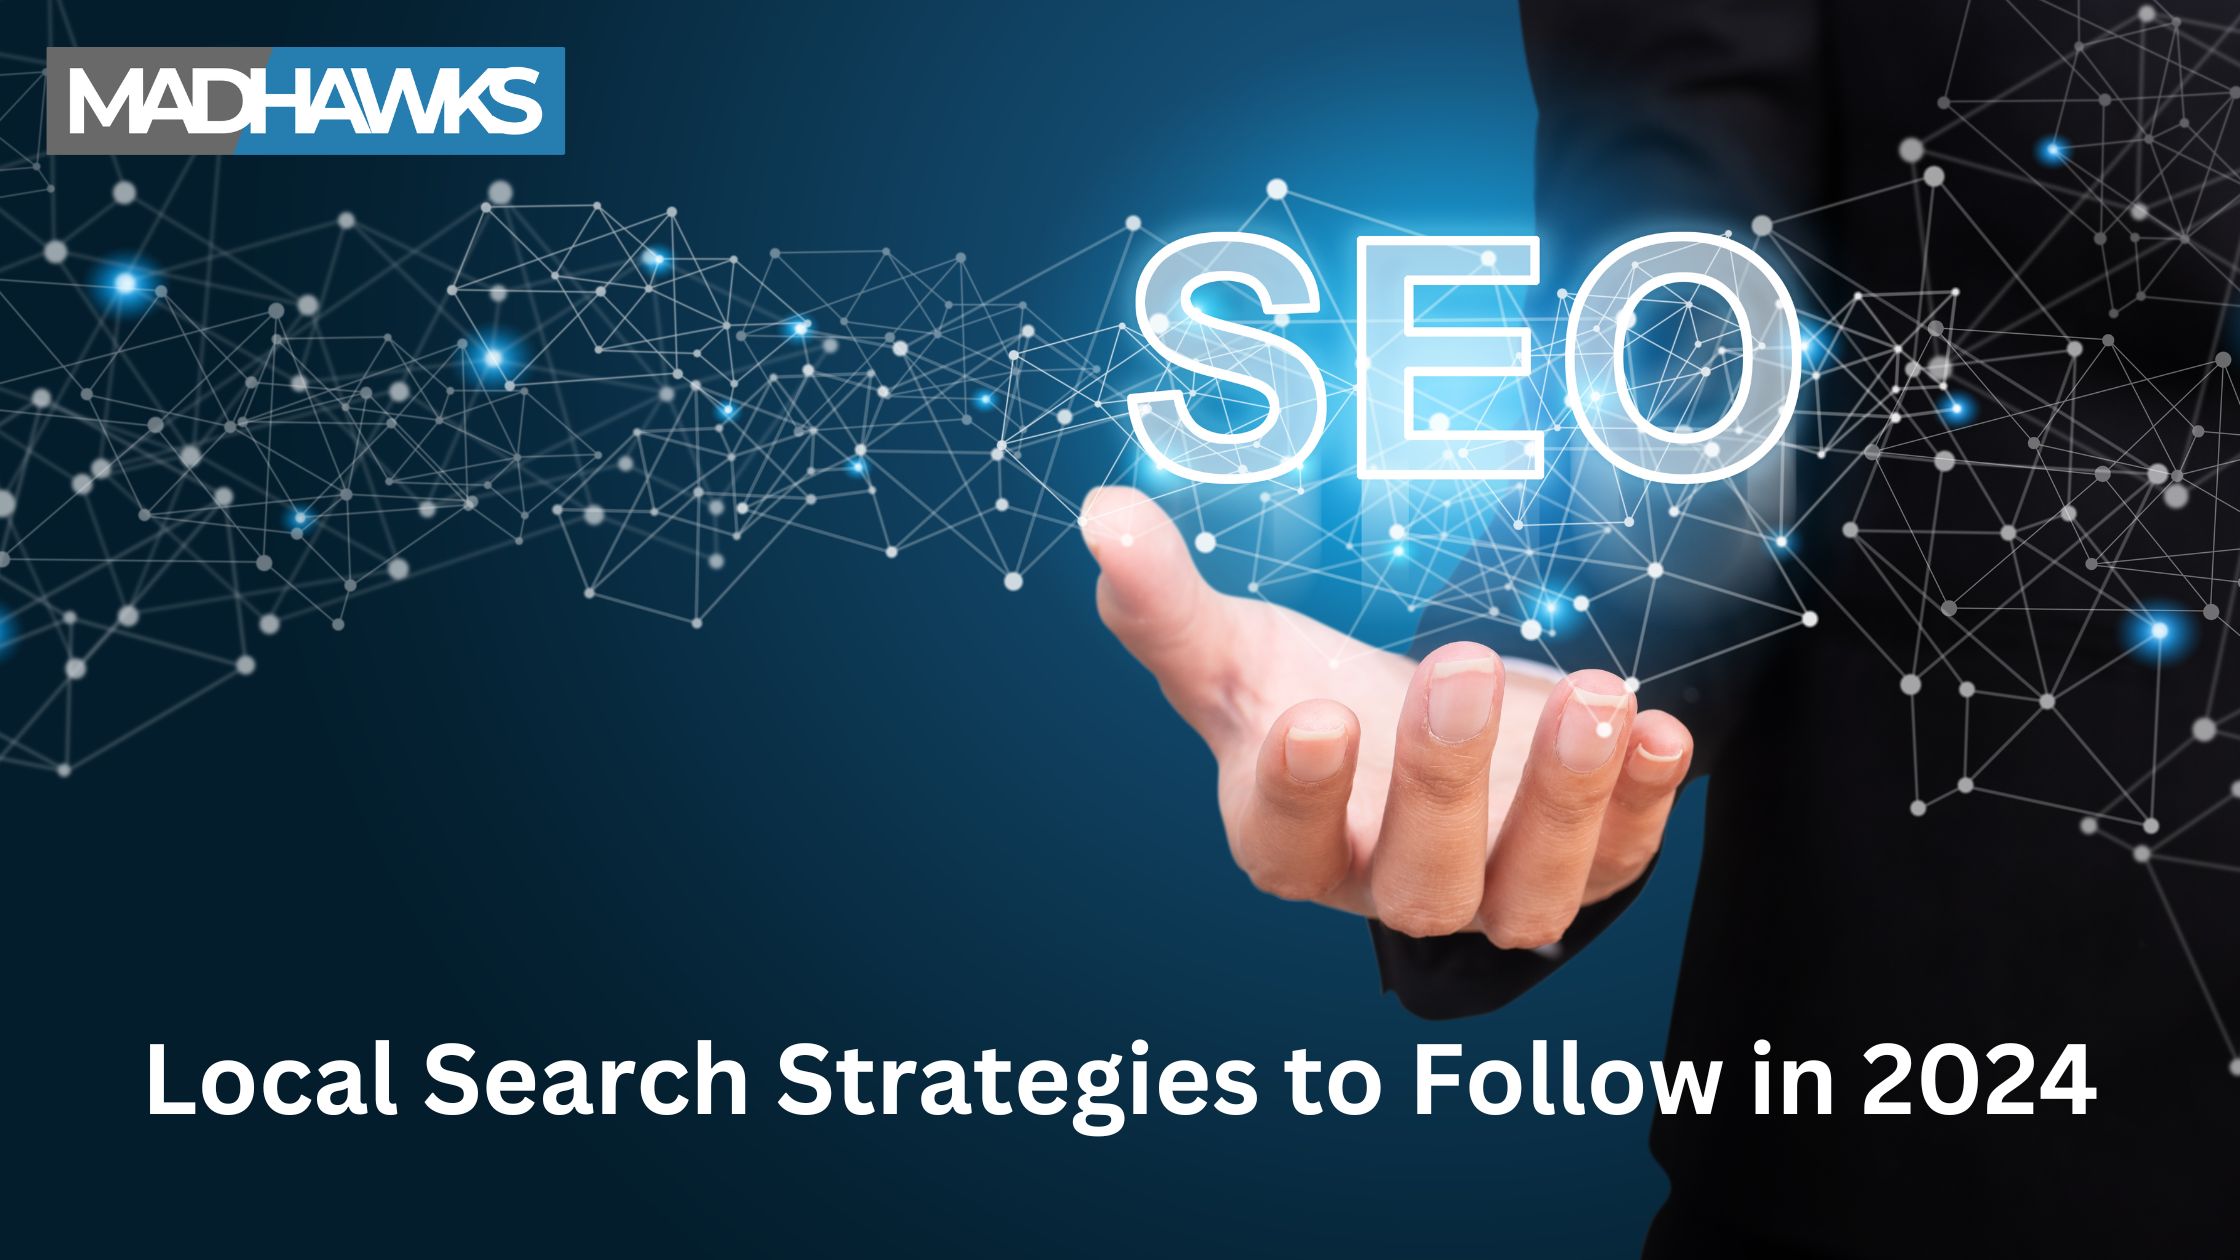 Local Search Strategies to Follow in 2024